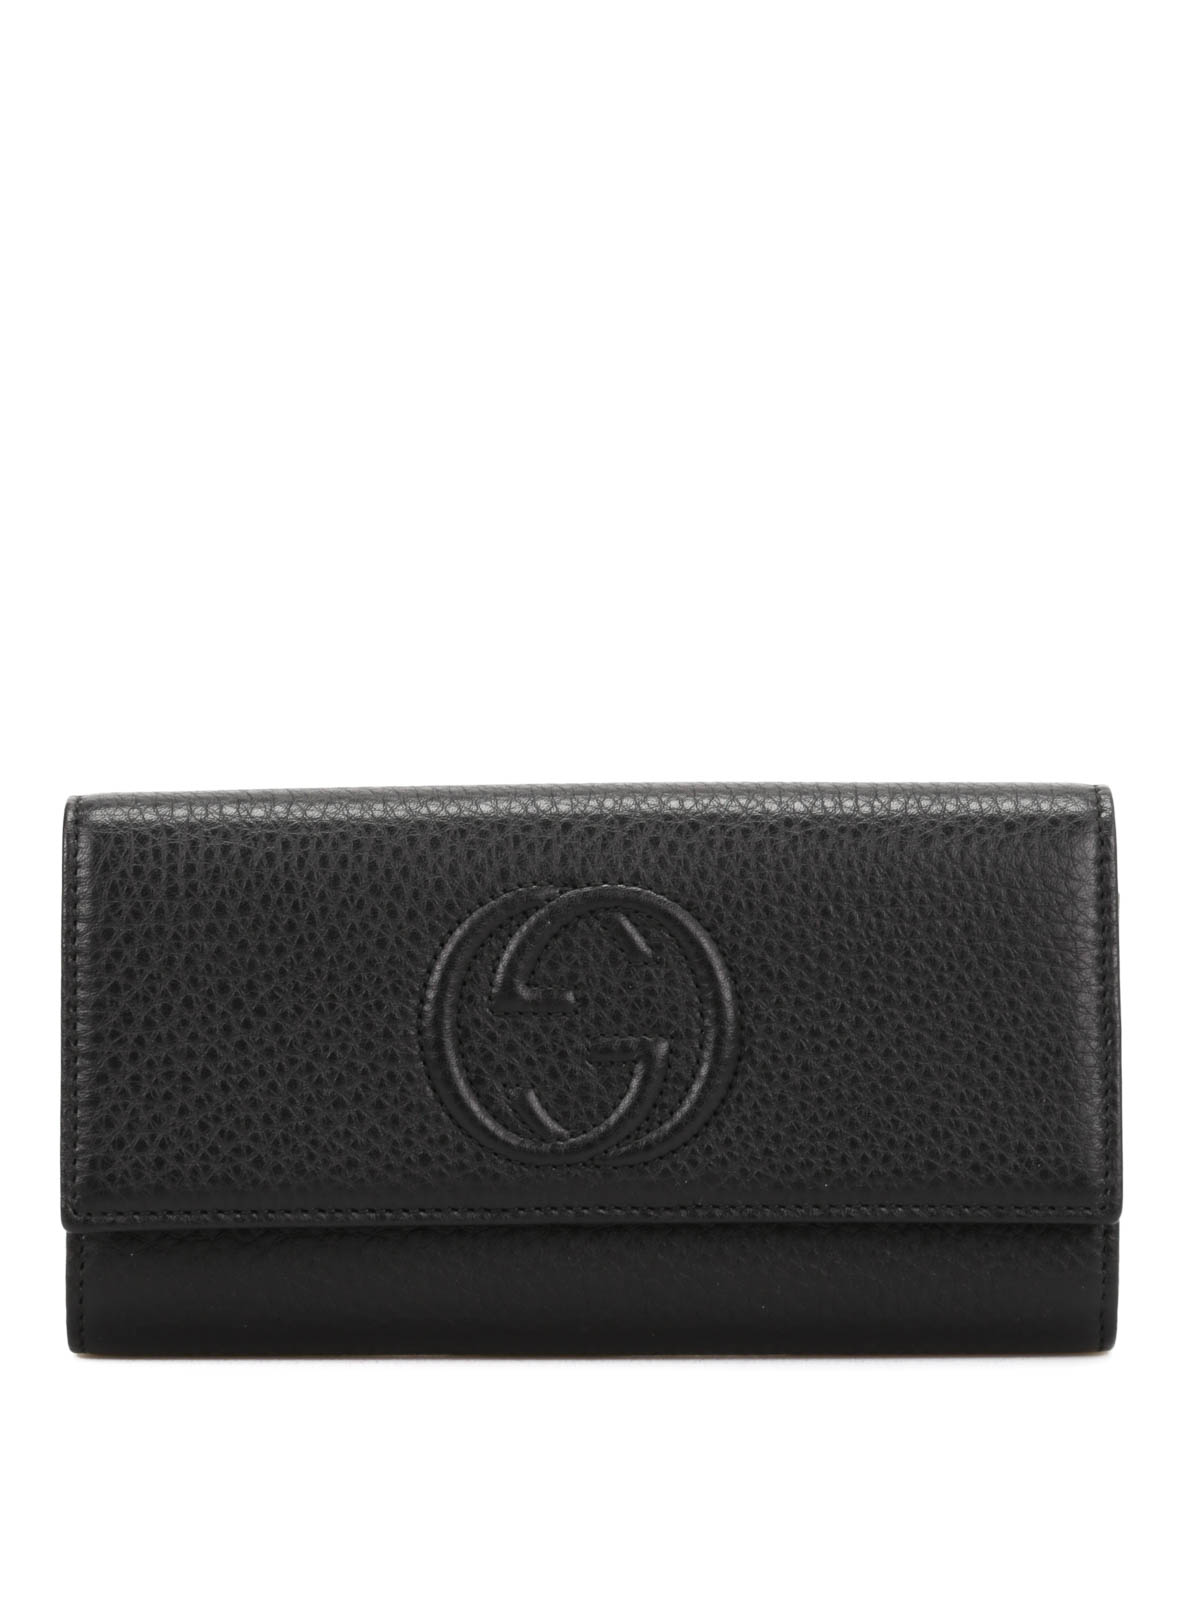 Gucci - Soho leather continental wallet 